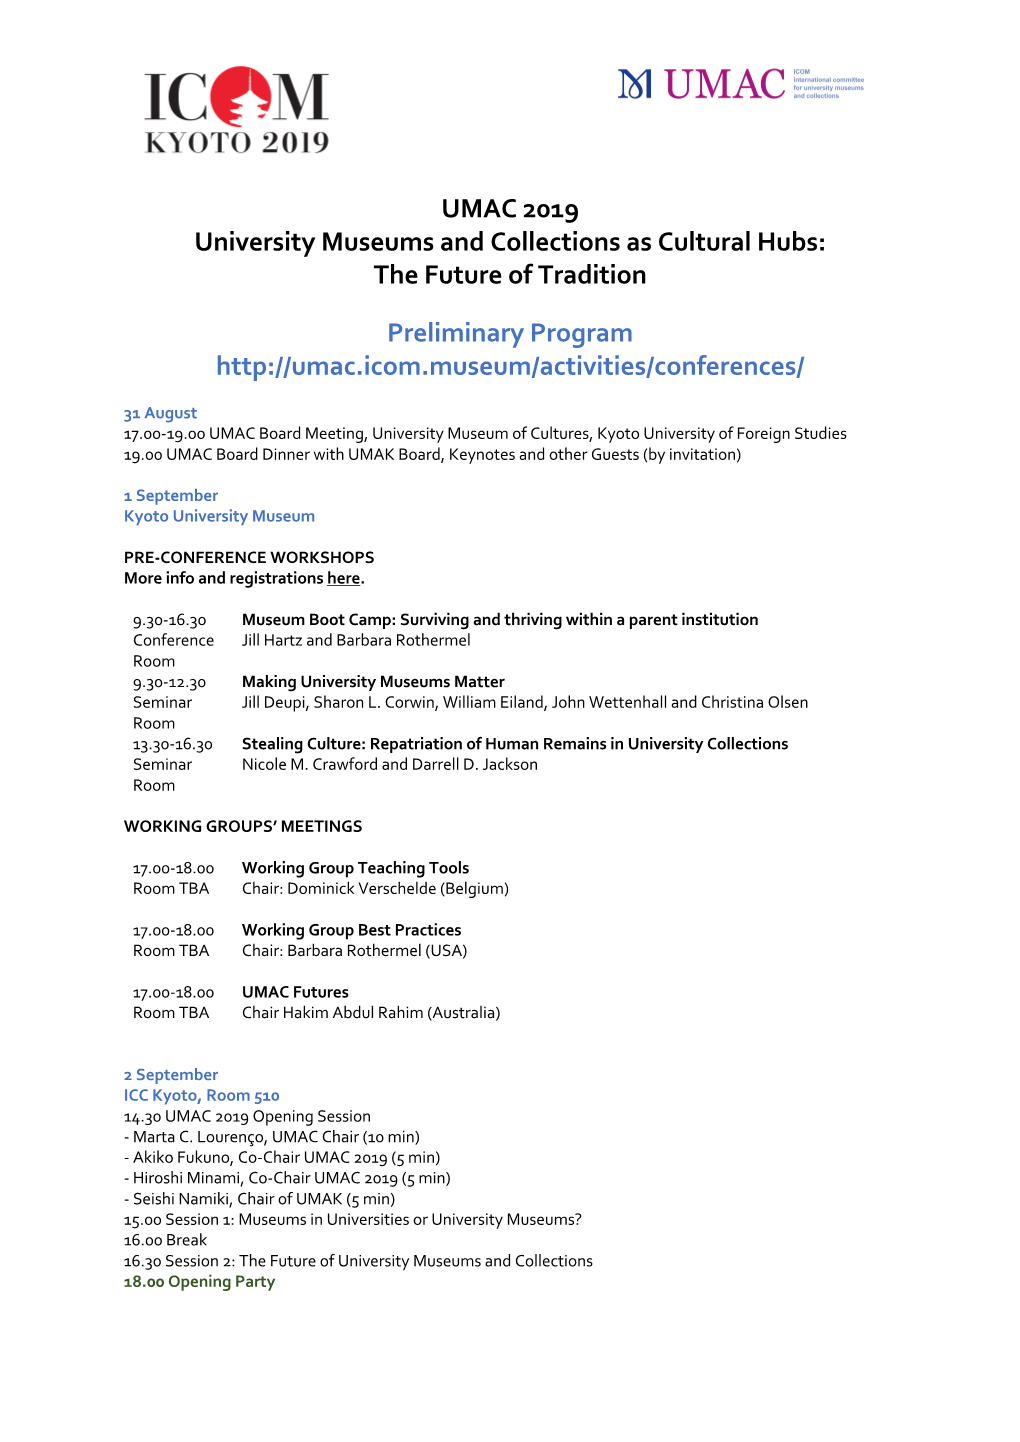 UMAC 2019 University Museums and Collections As Cultural Hubs: the Future of Tradition